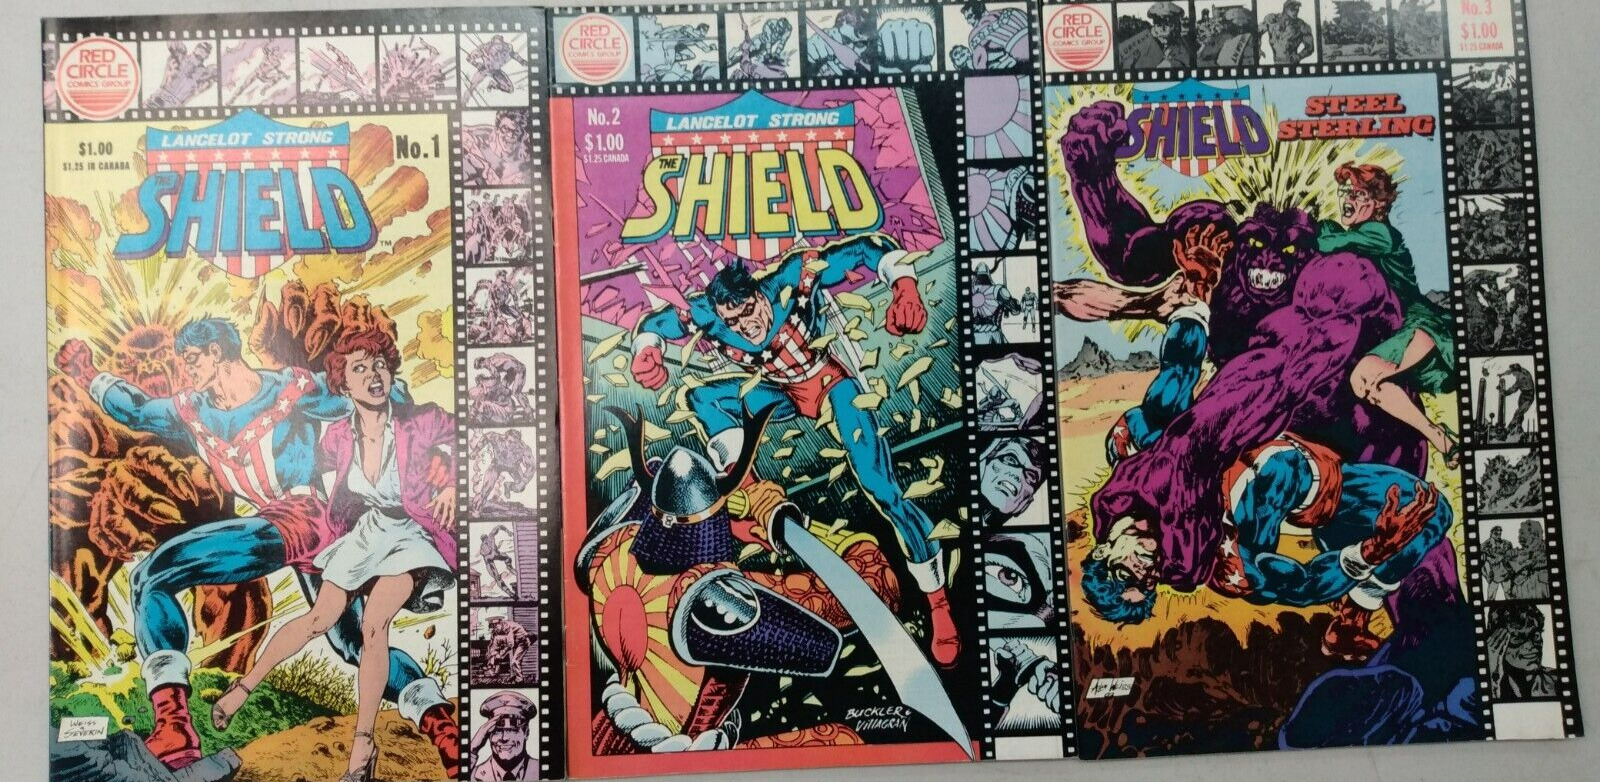 The Shield #1-3 Red Circle 1983 Comic Books